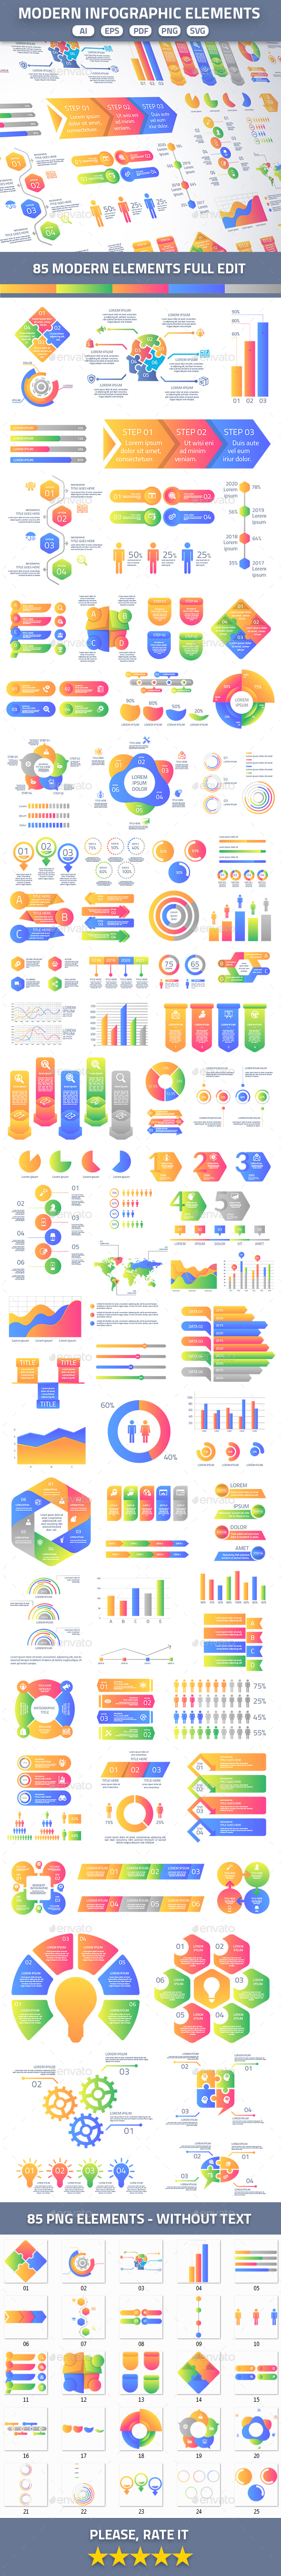 [DOWNLOAD]Ultra Modern Infographic Elements